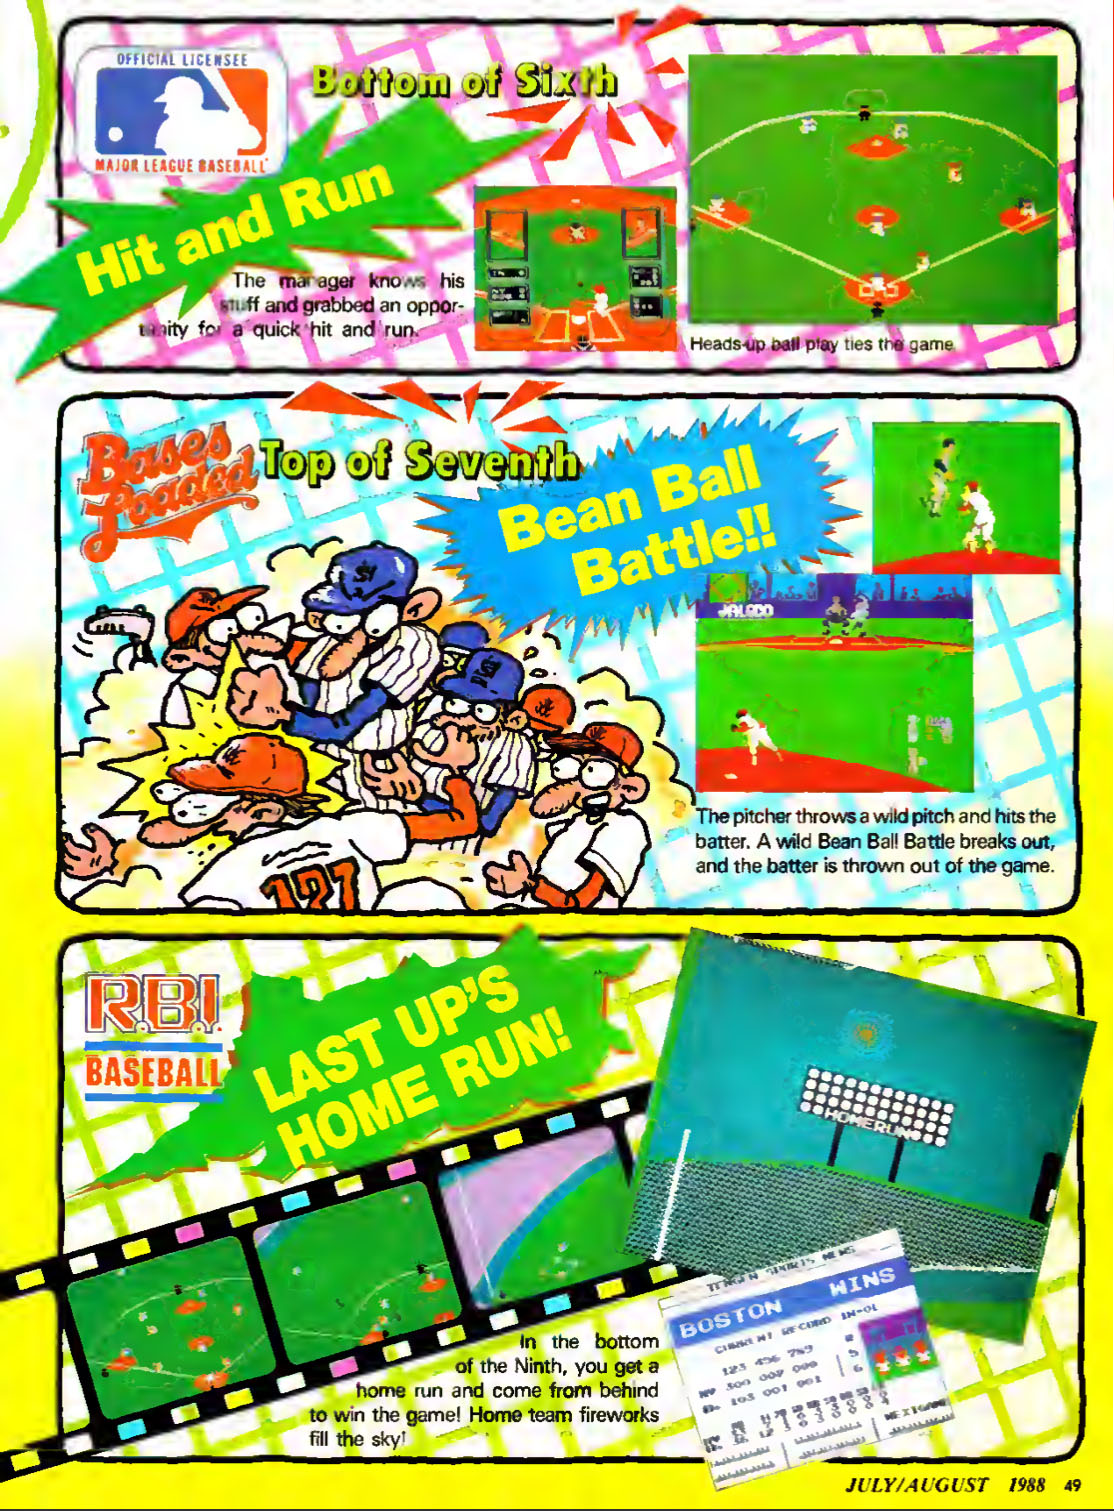 Baseball Round Up, Nintendo Power July-August 1988 page 49